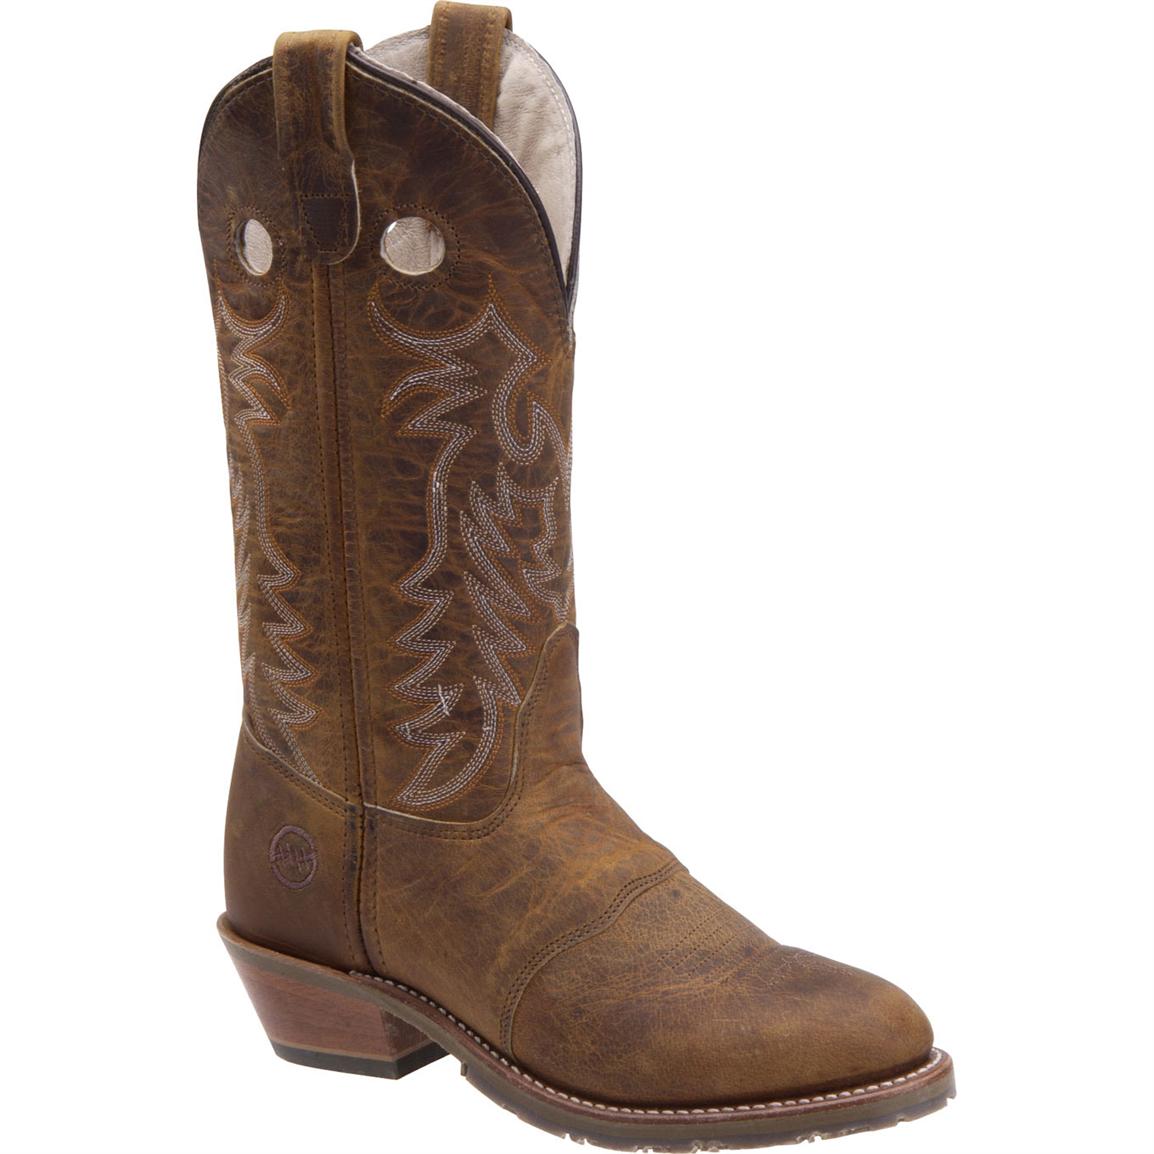 Cheap Cowgirl Boots For Sale - Yu Boots